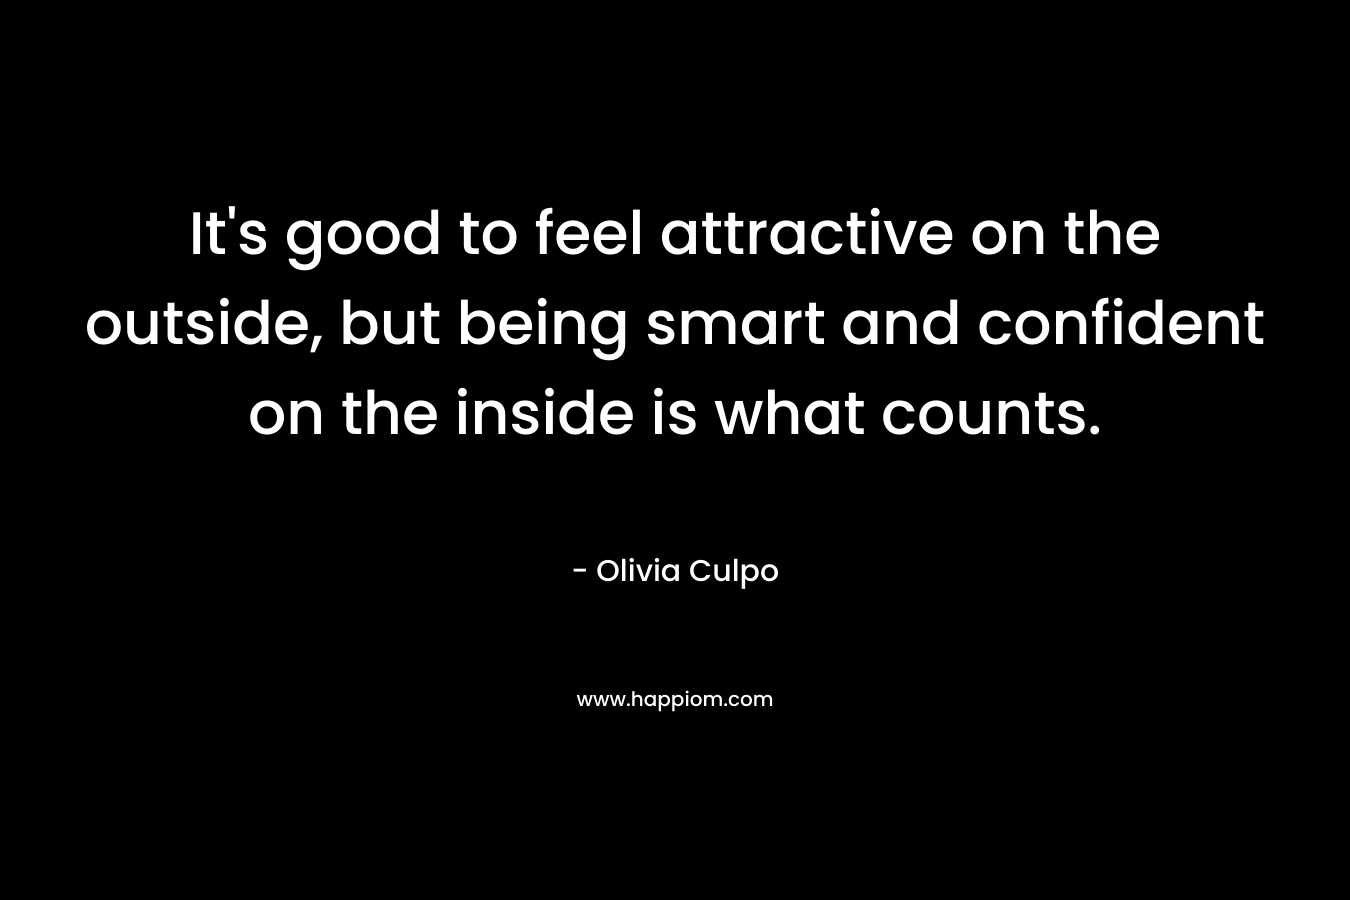 It's good to feel attractive on the outside, but being smart and confident on the inside is what counts.